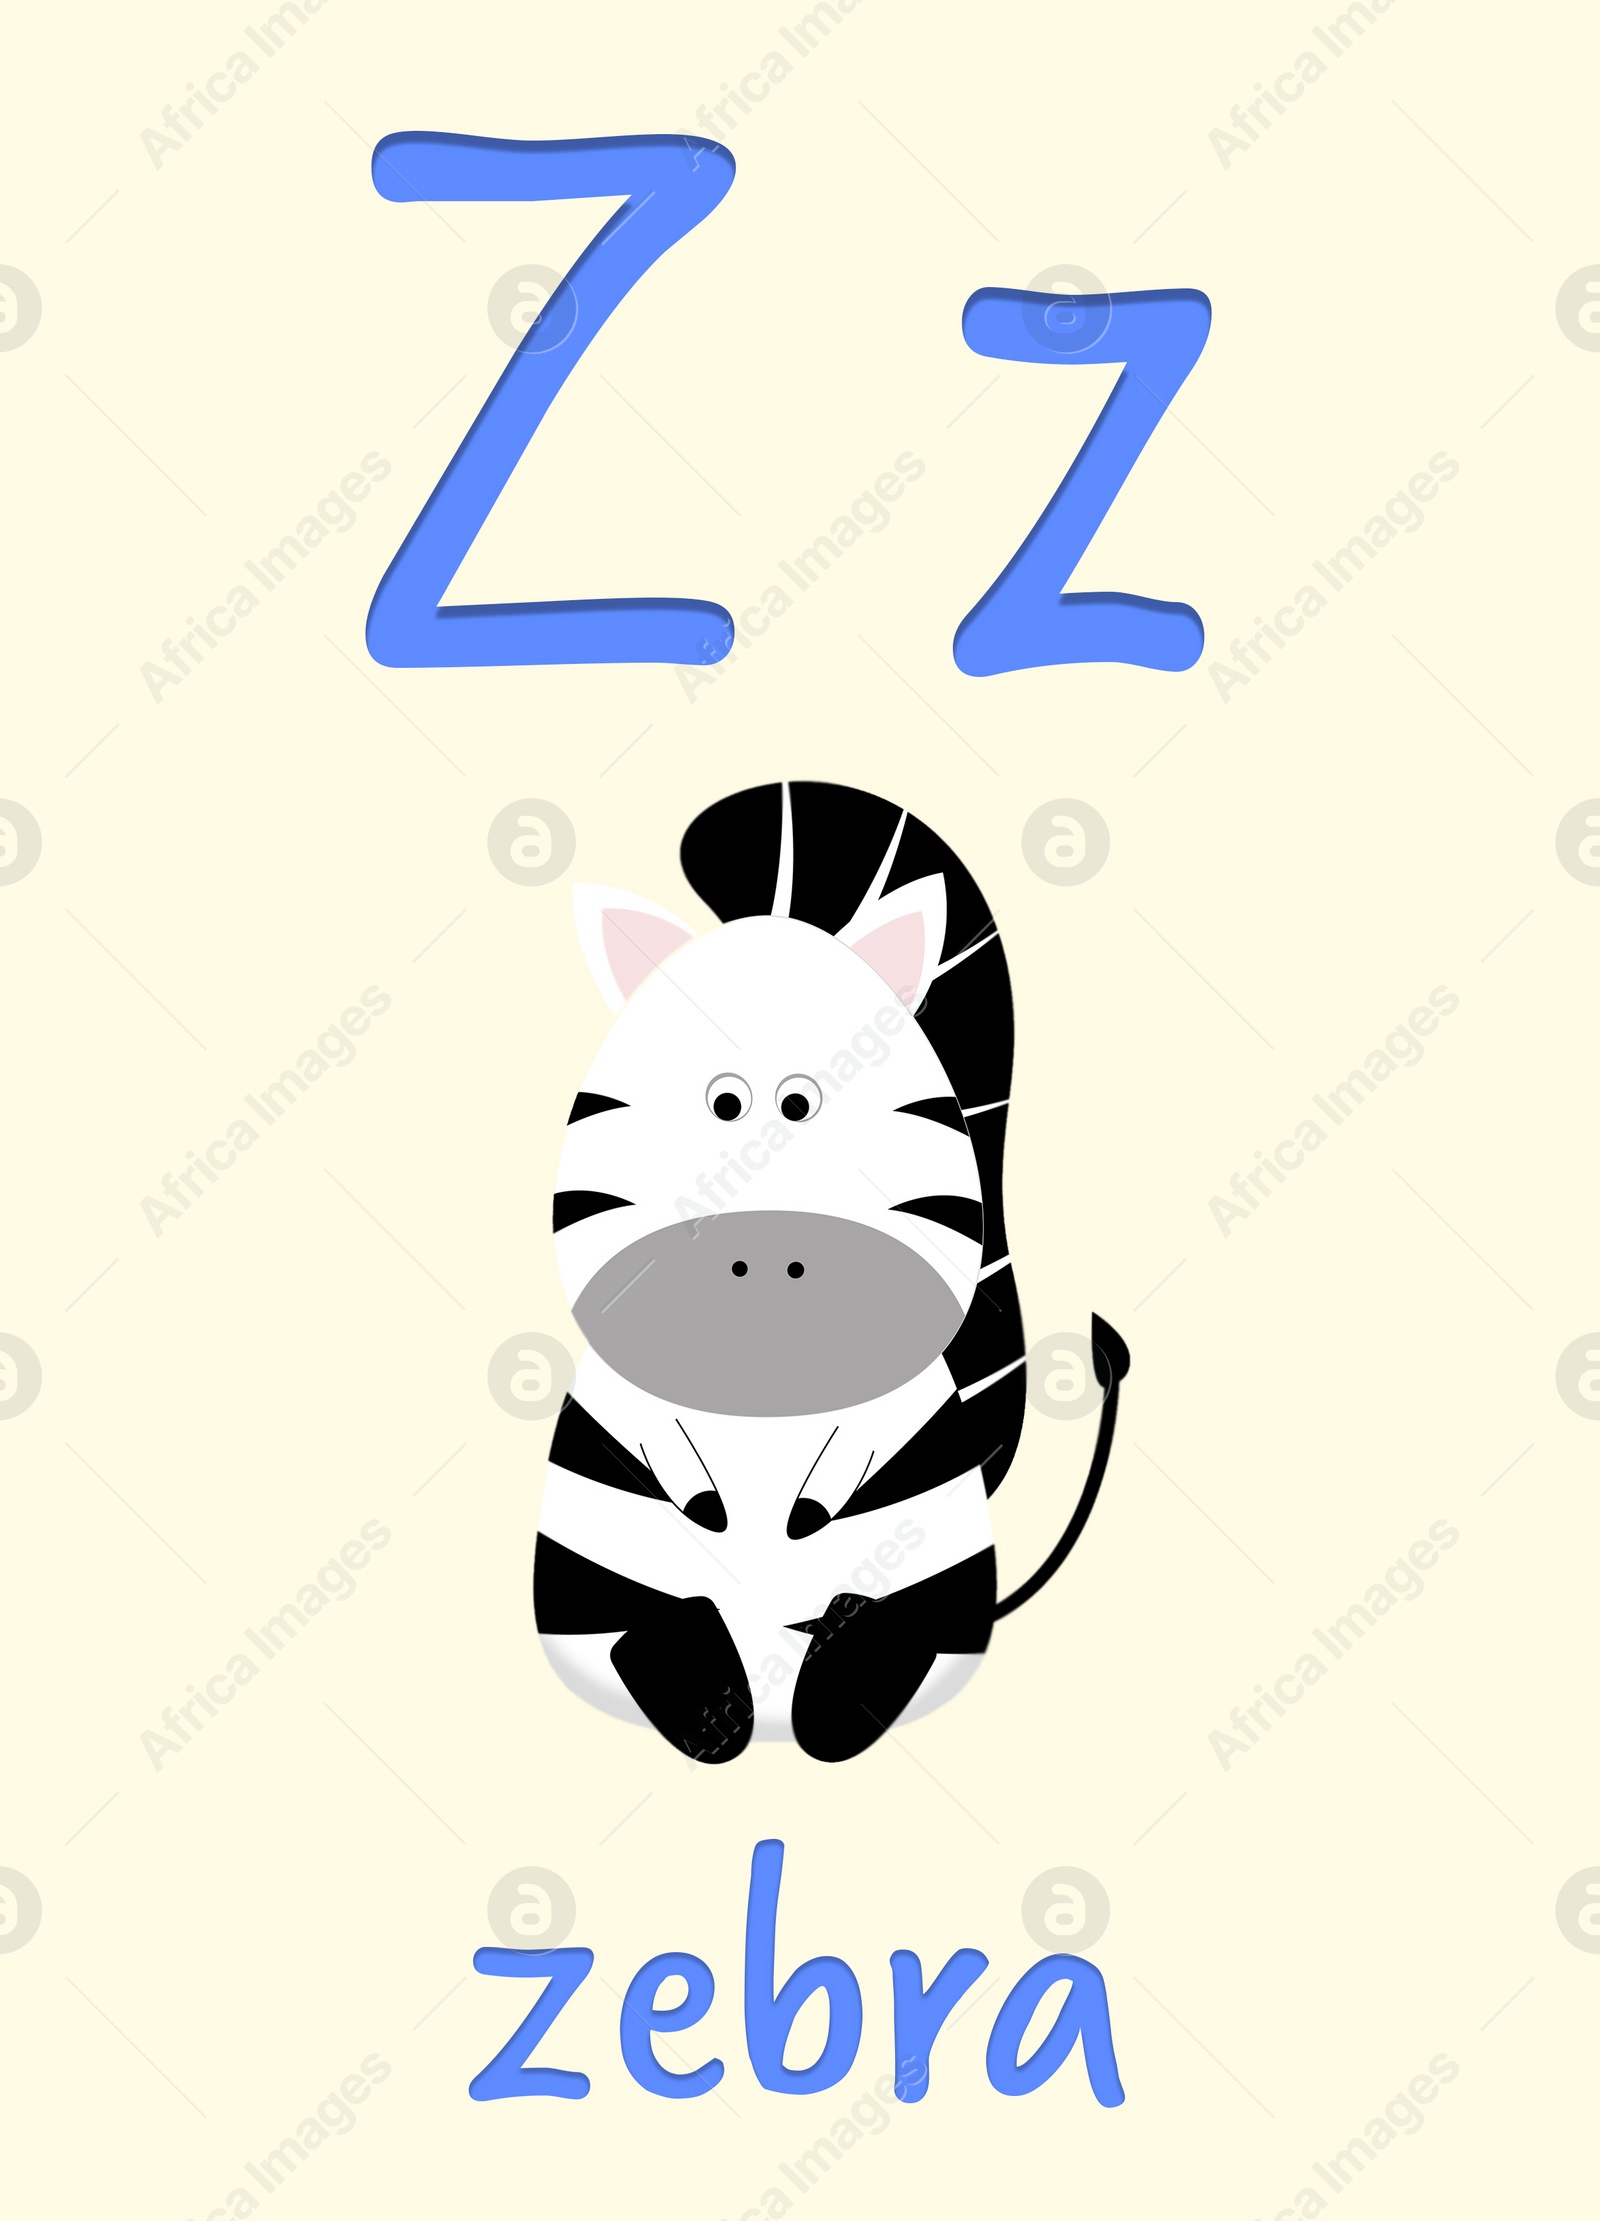 Illustration of Learning English alphabet. Card with letter Z and zebra, illustration